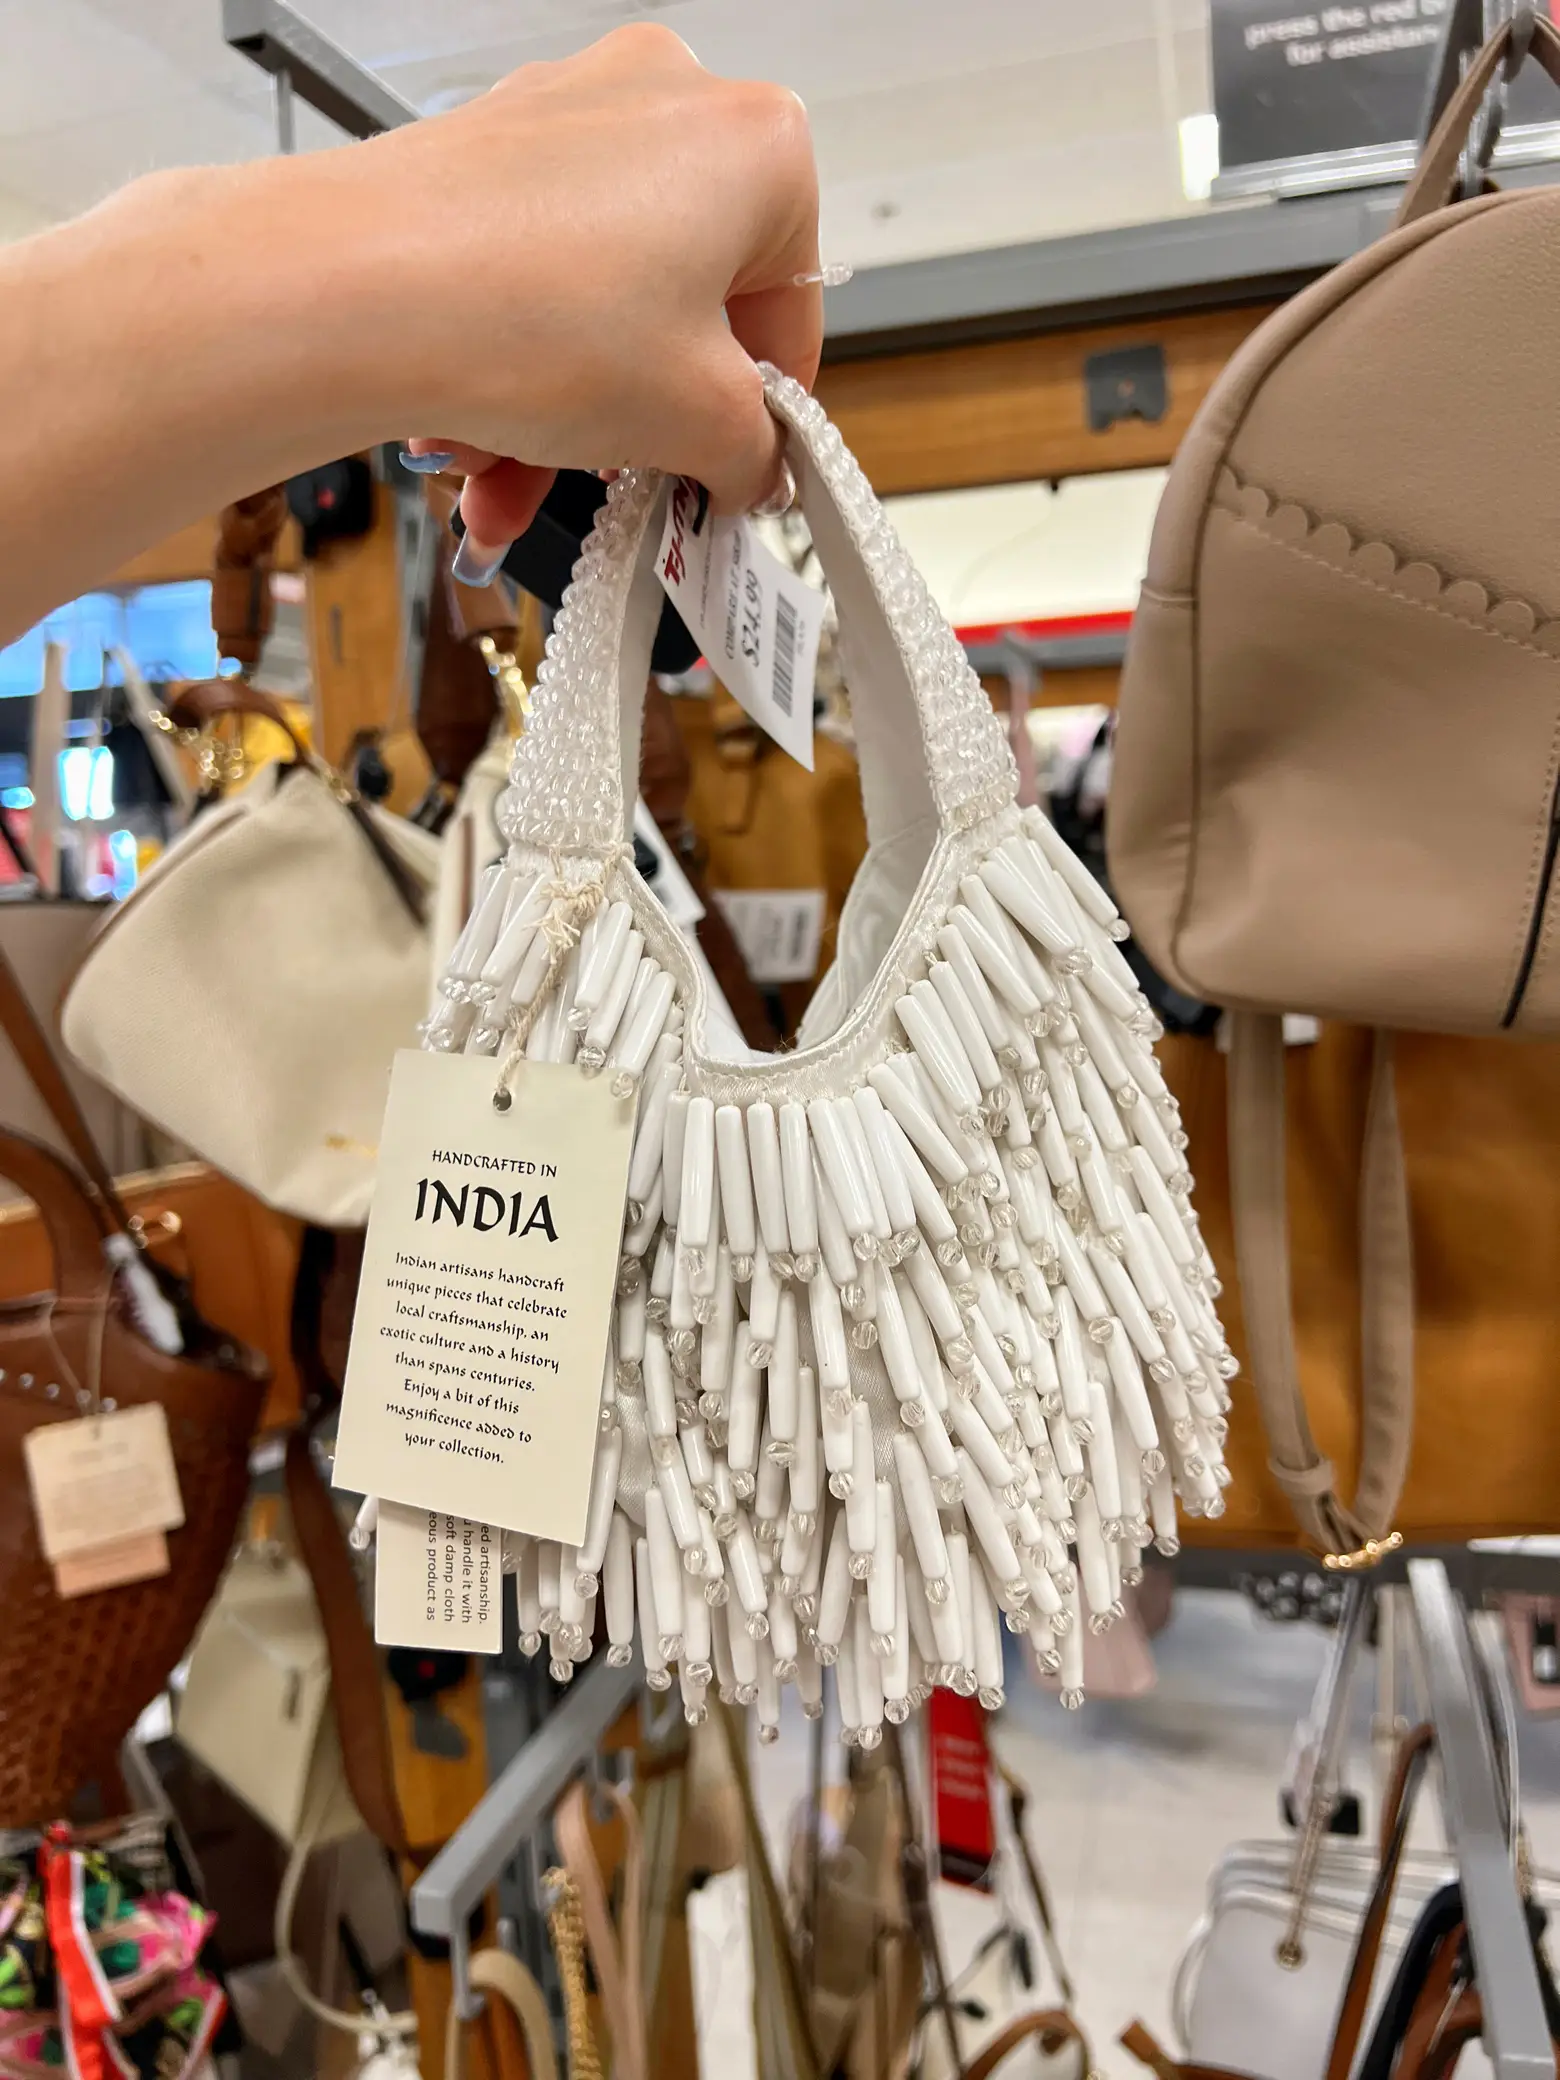 cute T.J. Maxx bags 🍊, Gallery posted by Emily Schultz